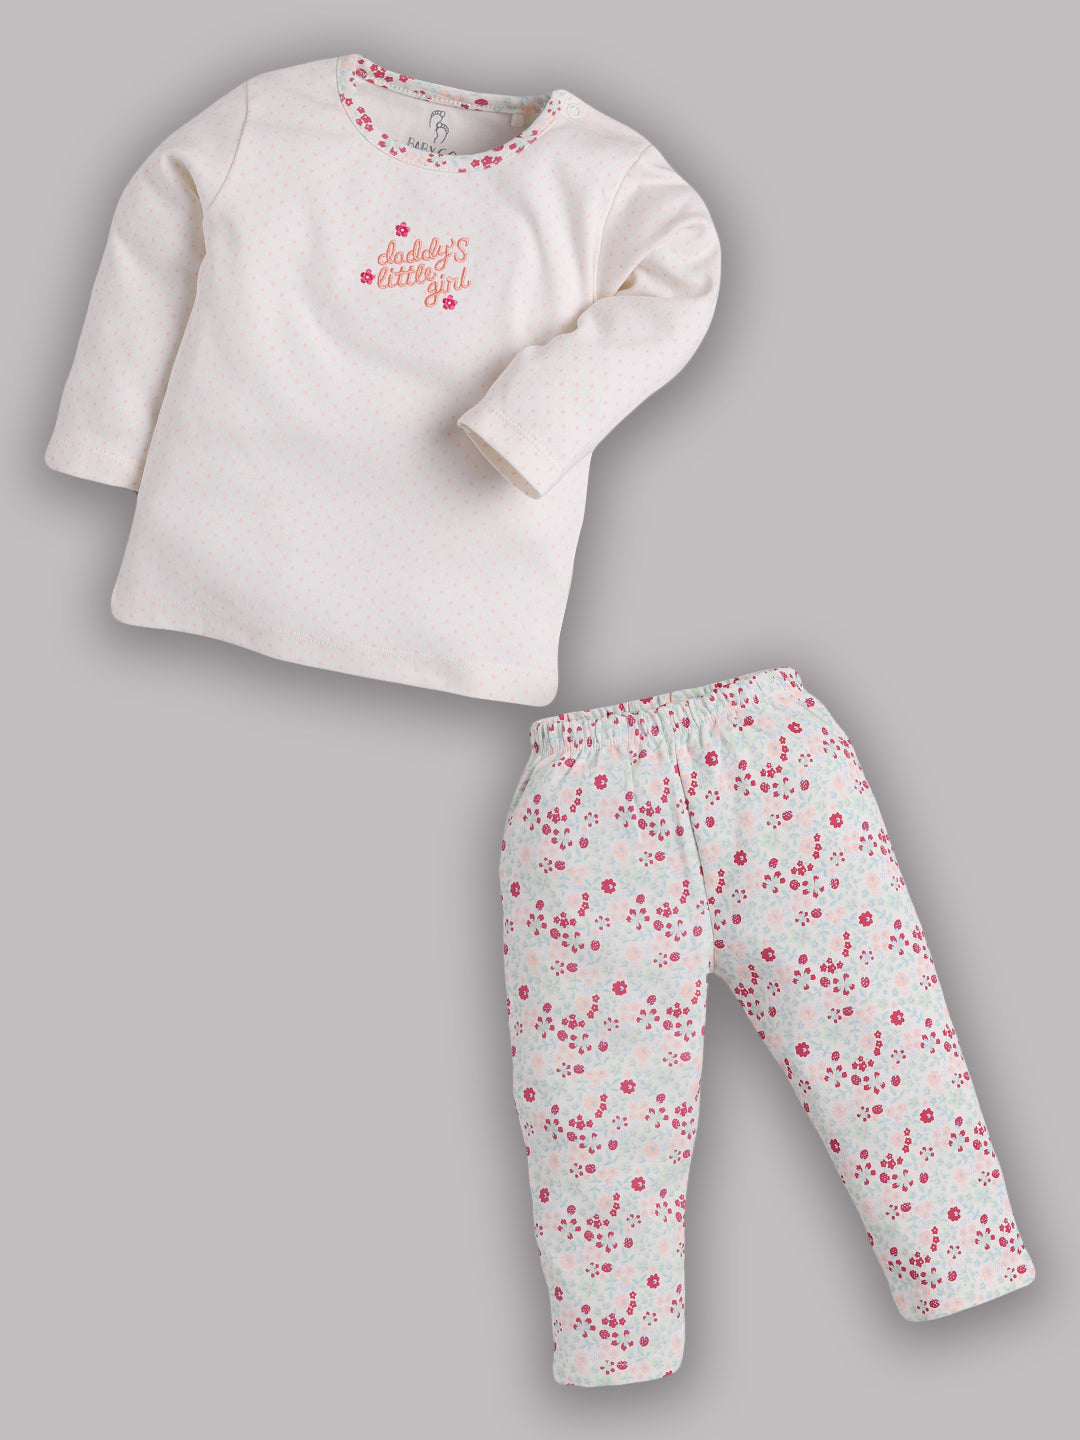 Baby full sleeve Cotton Dress/T-shirts pant set clothes for baby Girl Daddy's Little Girl PEACH